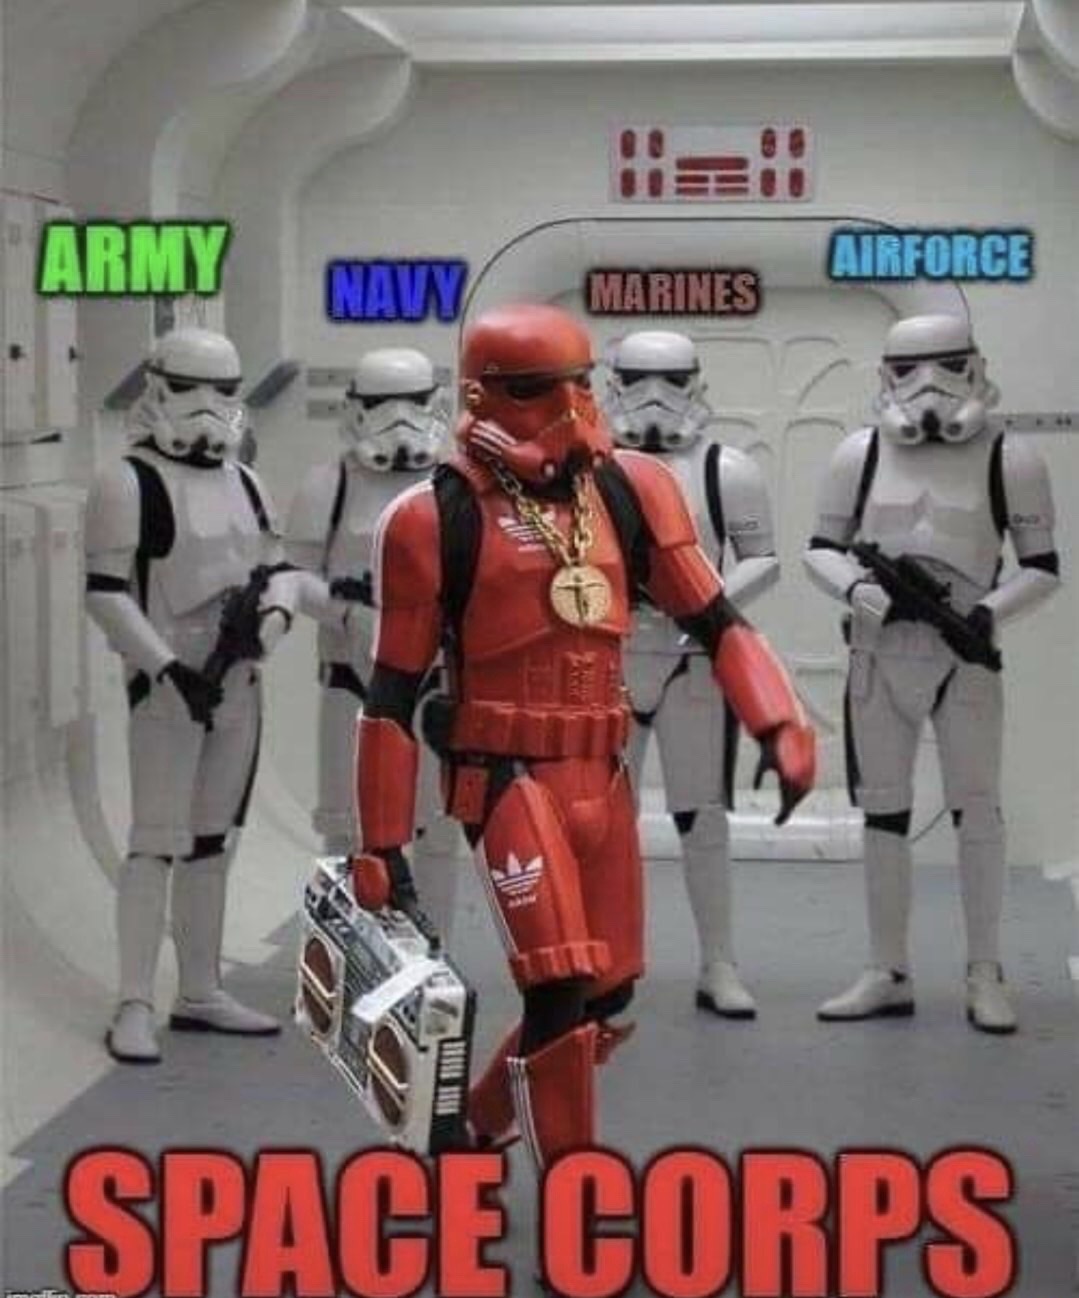 cool storm trooper - Army Airforce Nav Marines Space Corps